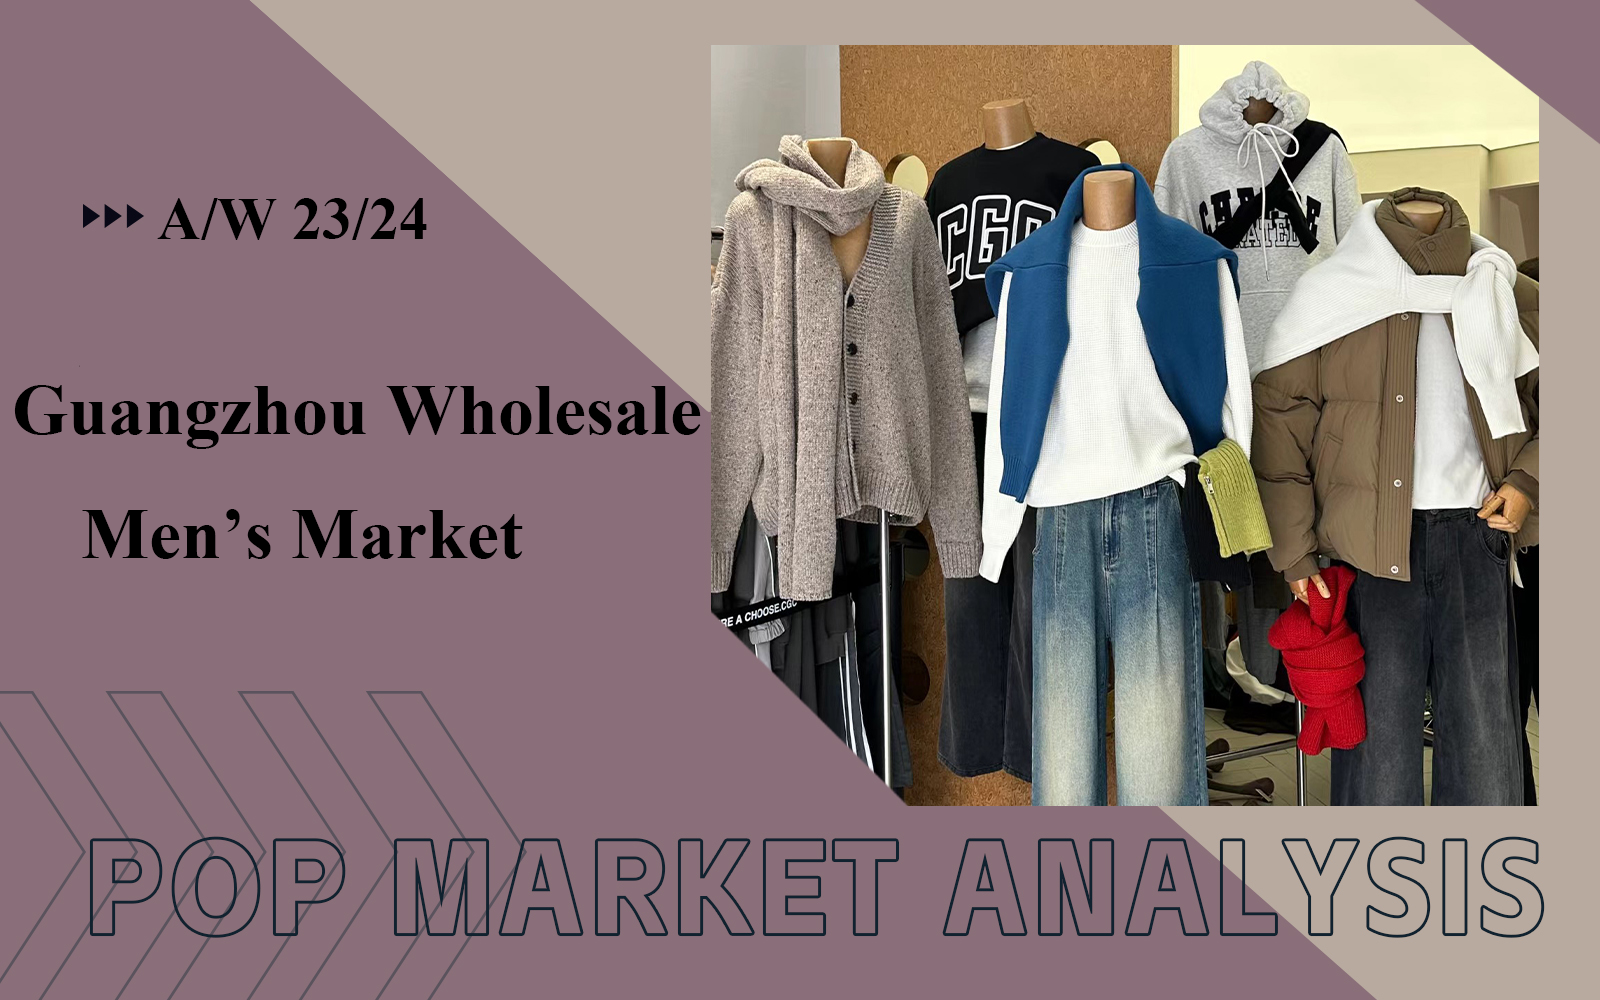 The Comprehensive Analysis of Guangzhou Wholesale Men's Market